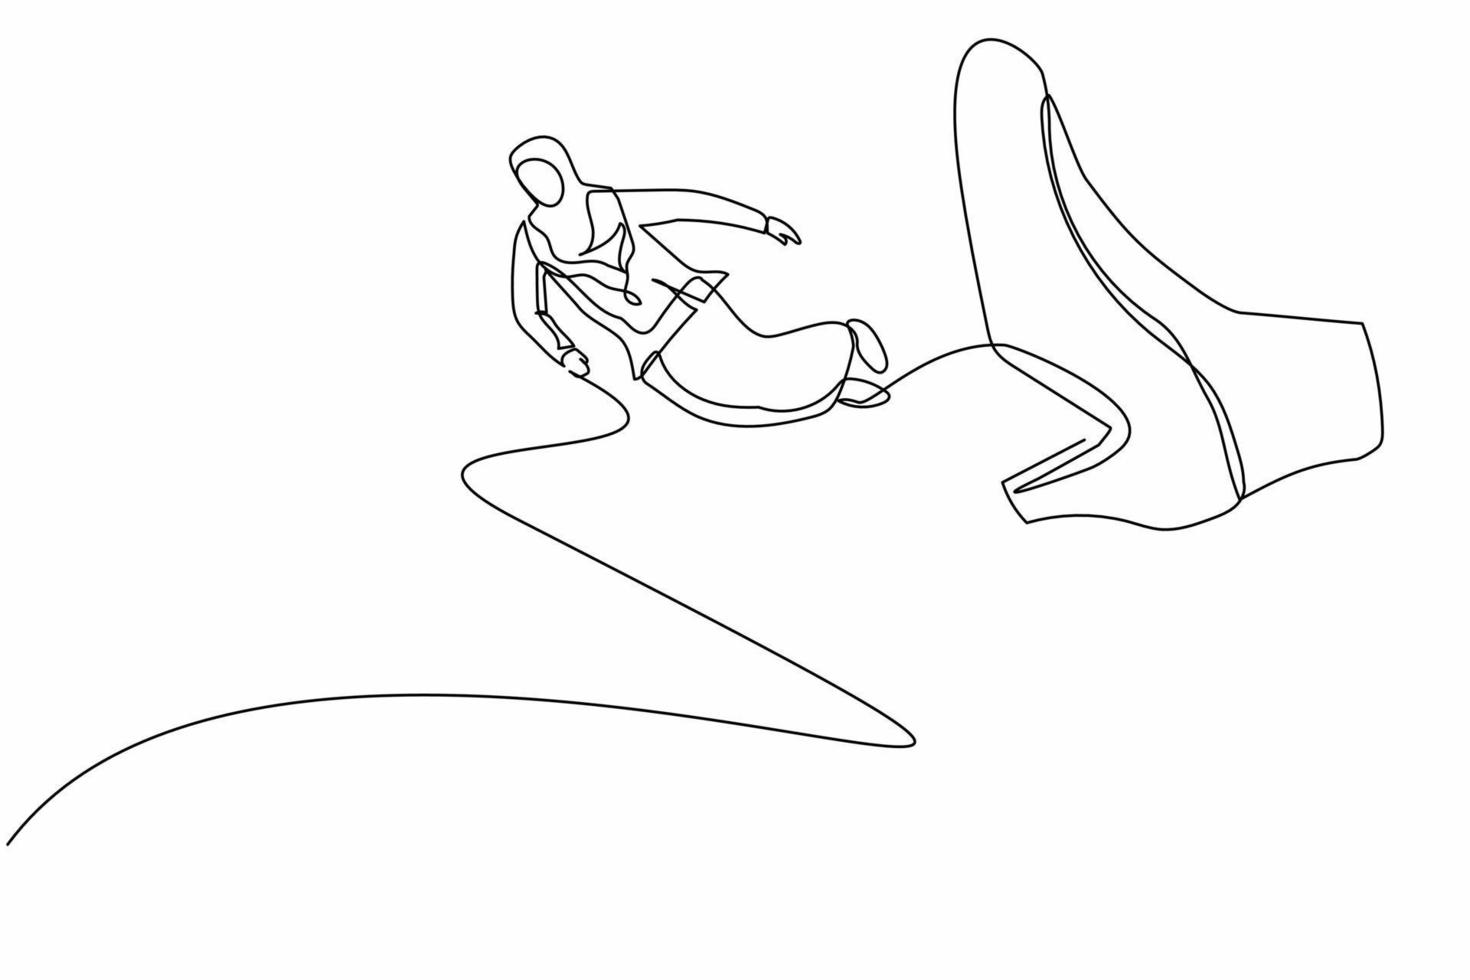 Single continuous line drawing failed Arab businesswoman getting fired, flying through air after being kicked in the back. Minimalism metaphor concept. One line draw graphic design vector illustration